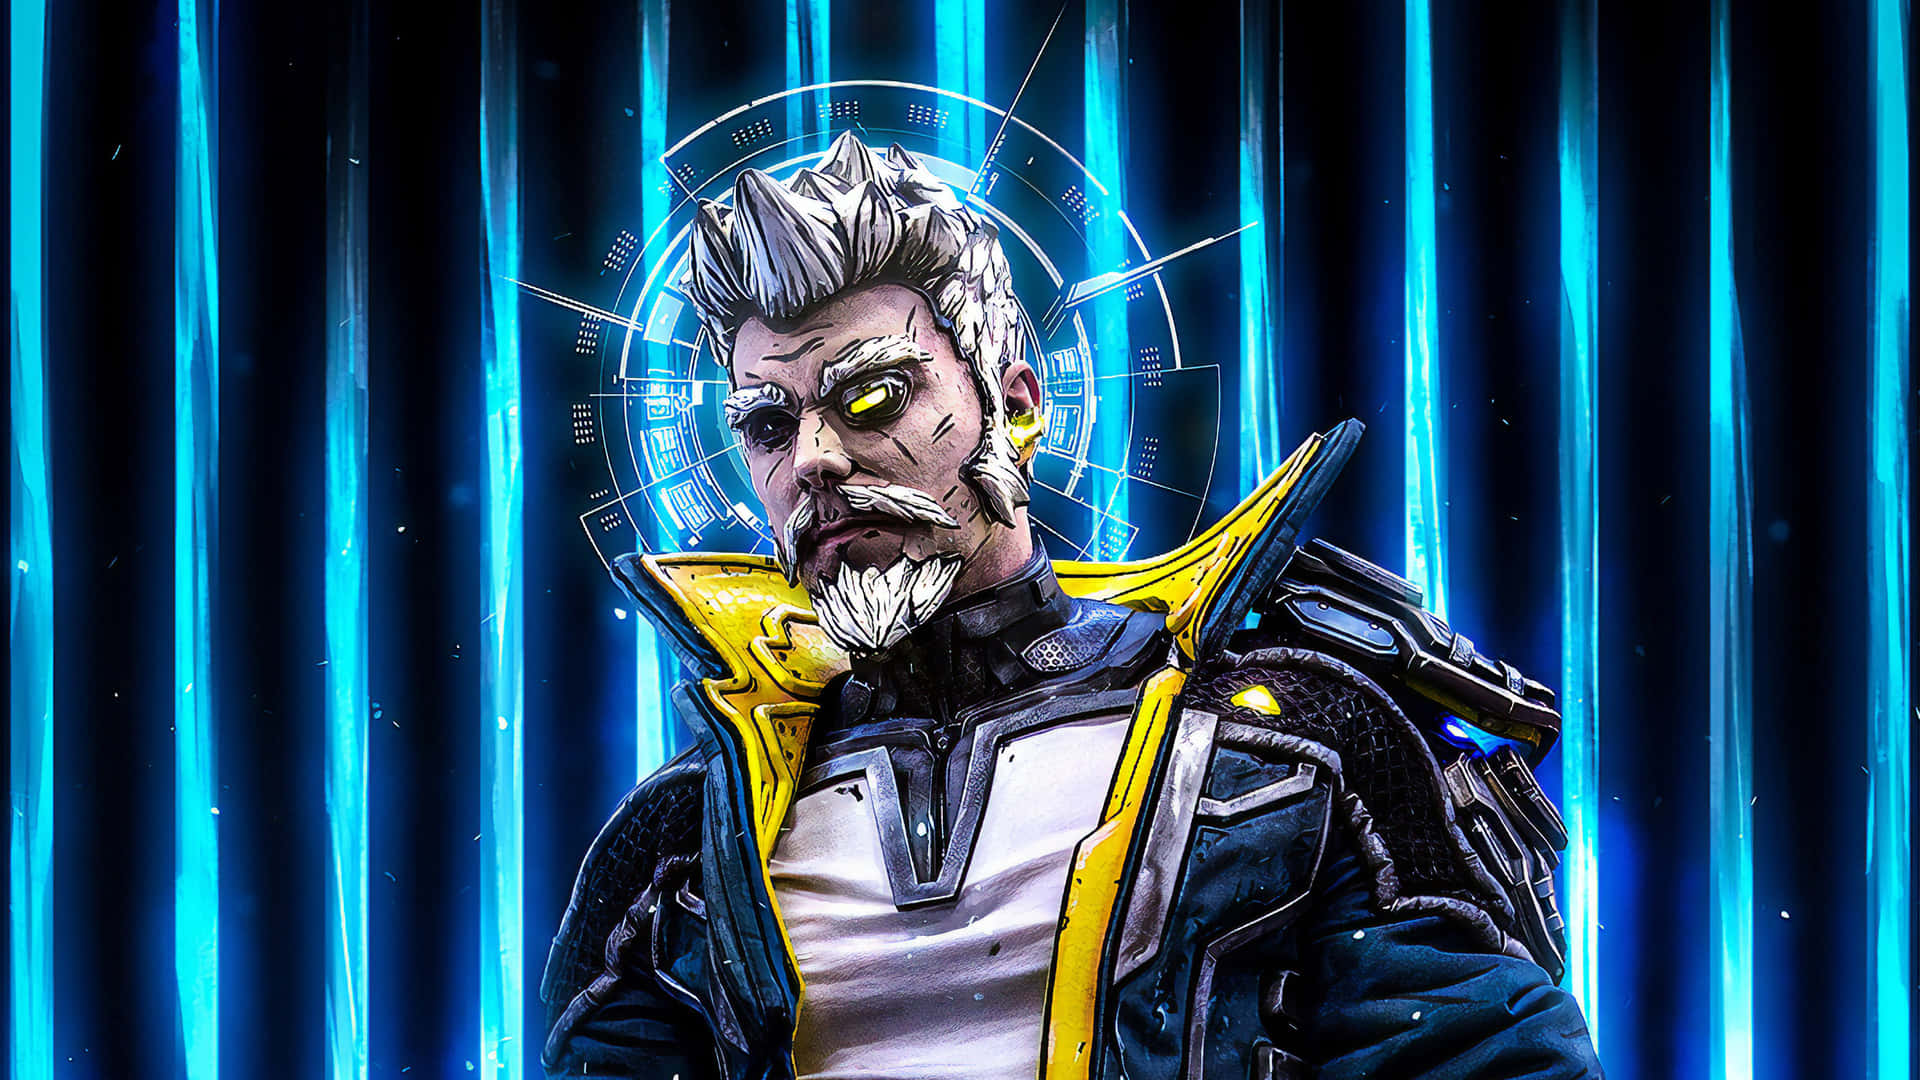 Embark on an Epic Adventure with Borderlands 3